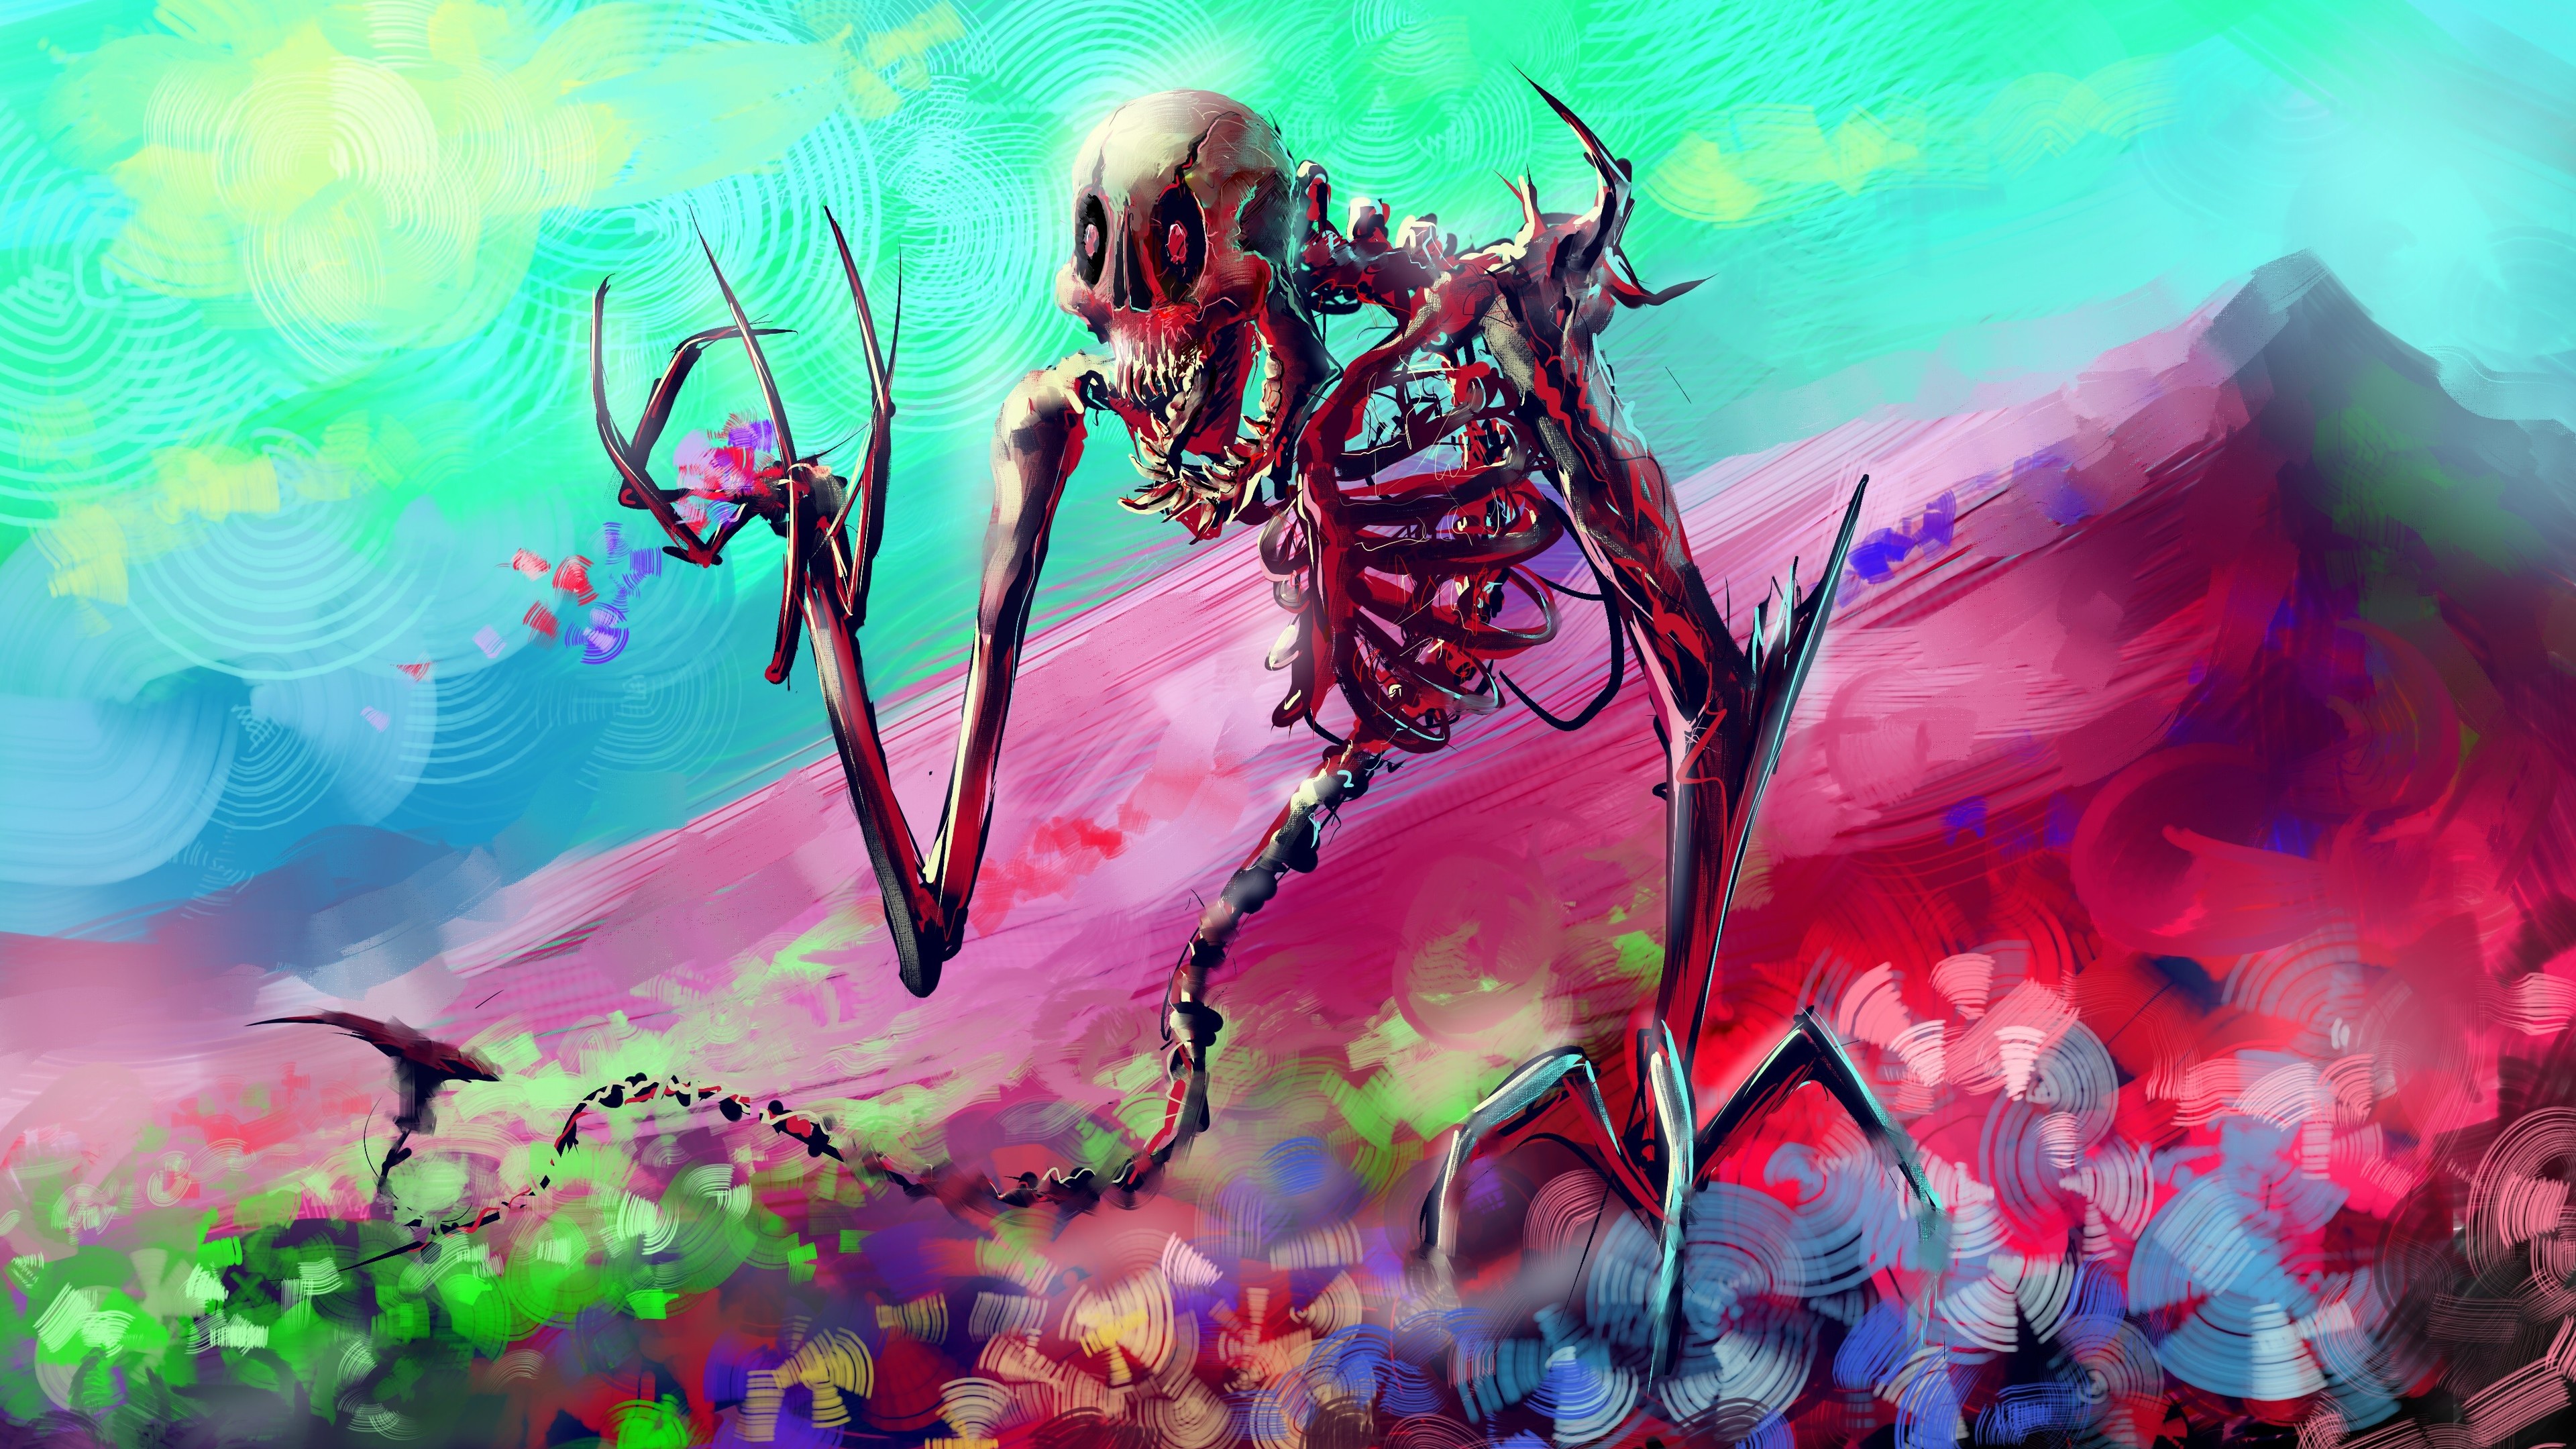 Colorful Skull Wallpapers